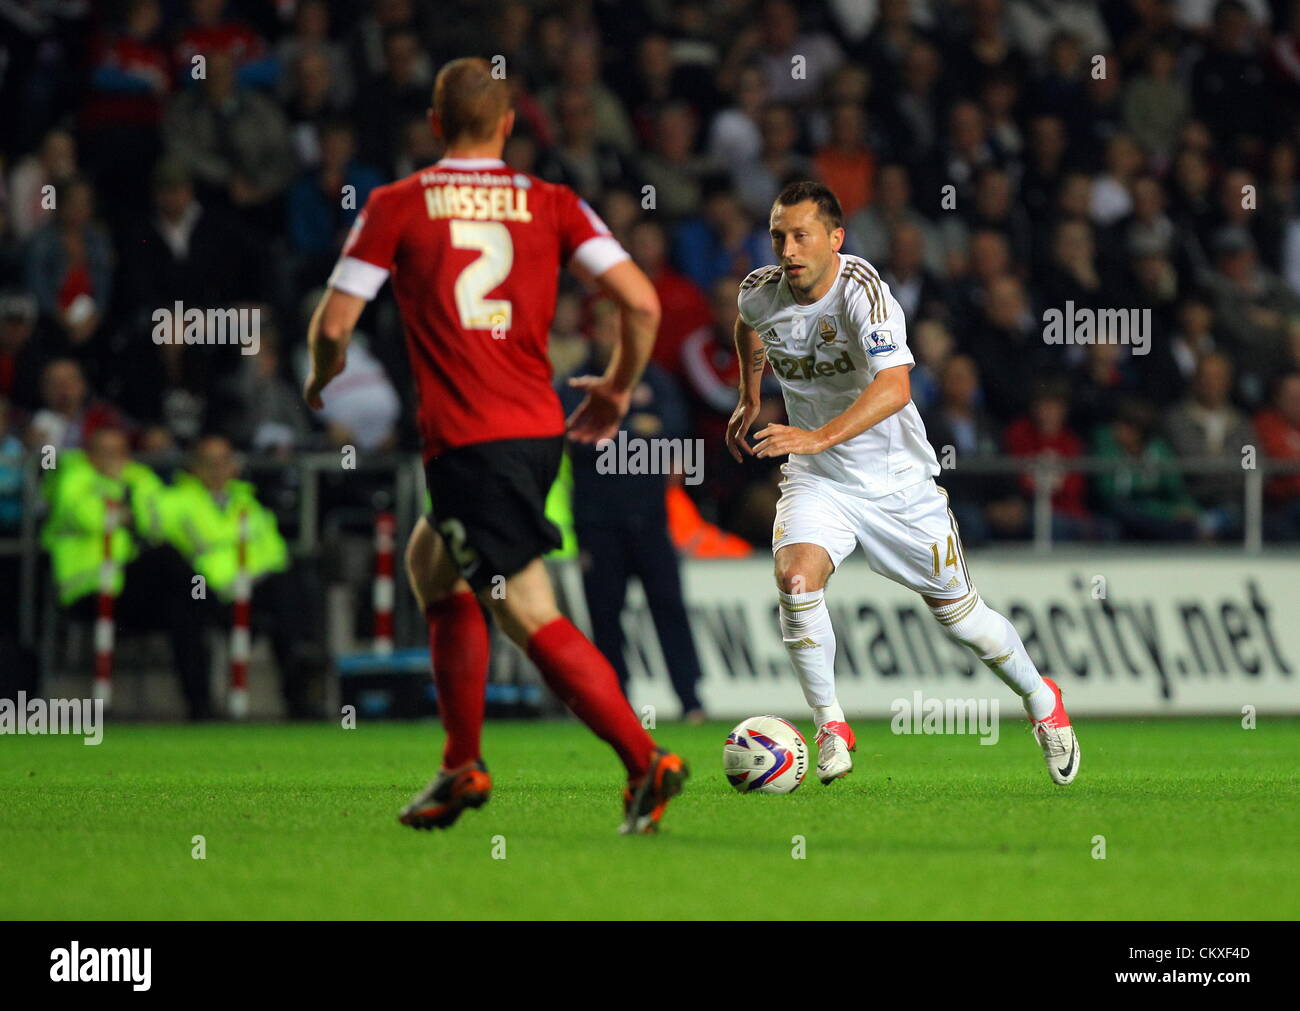 Liberty Stadium, Swansea, UK. 28th Aug 2012.   Pictured: Stephen Dobbie of Swansea (R) charging past Bobby Hassell of Barnsley (L). Capital One Cup game, Swansea City FC v Barnsley at the Liberty Stadium, south Wales, UK. Credit:  D Legakis / Alamy Live News Stock Photo